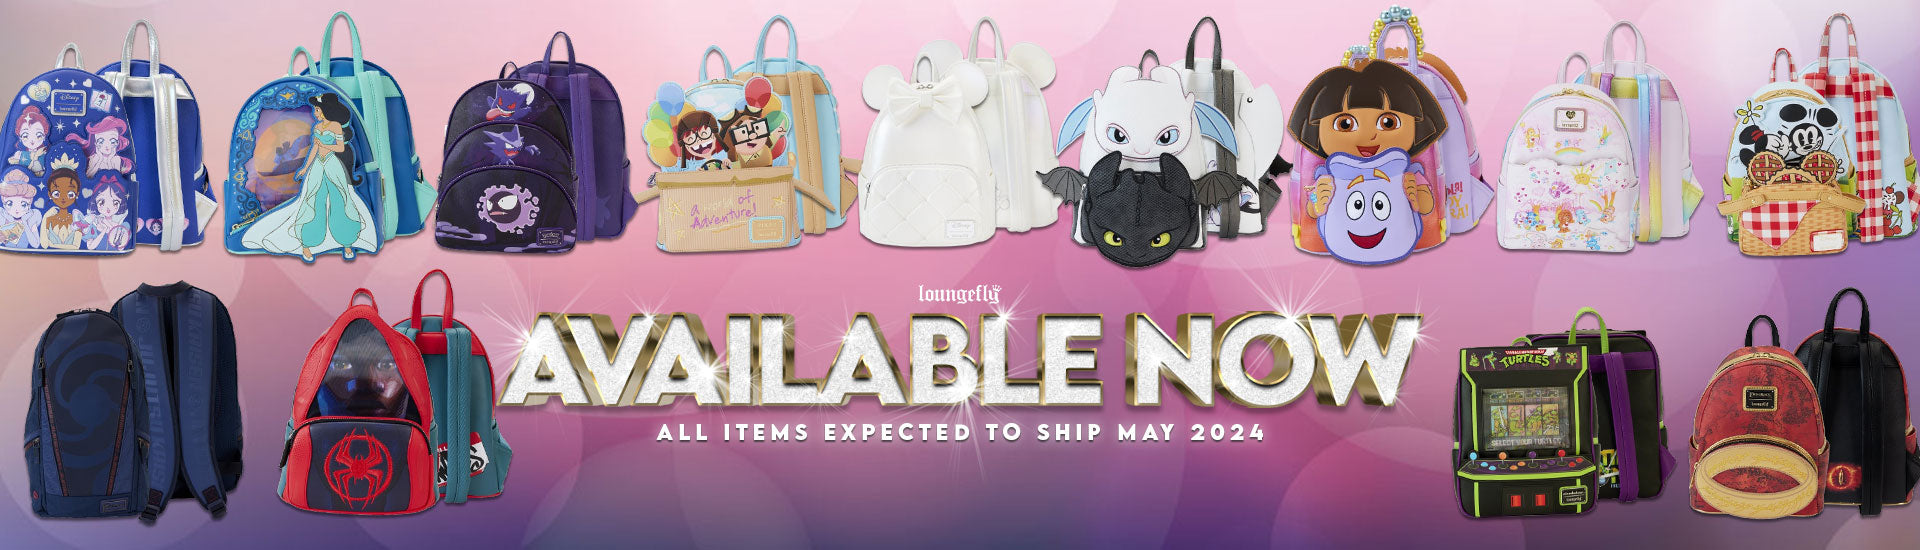 Loungefly May 2024 Collection Showcasing backpacks with designs from licenses such as Disney, How to Train You Dragon, Dora the Explorer, Pixar, Pokemon, Care Bears, Marvel and More